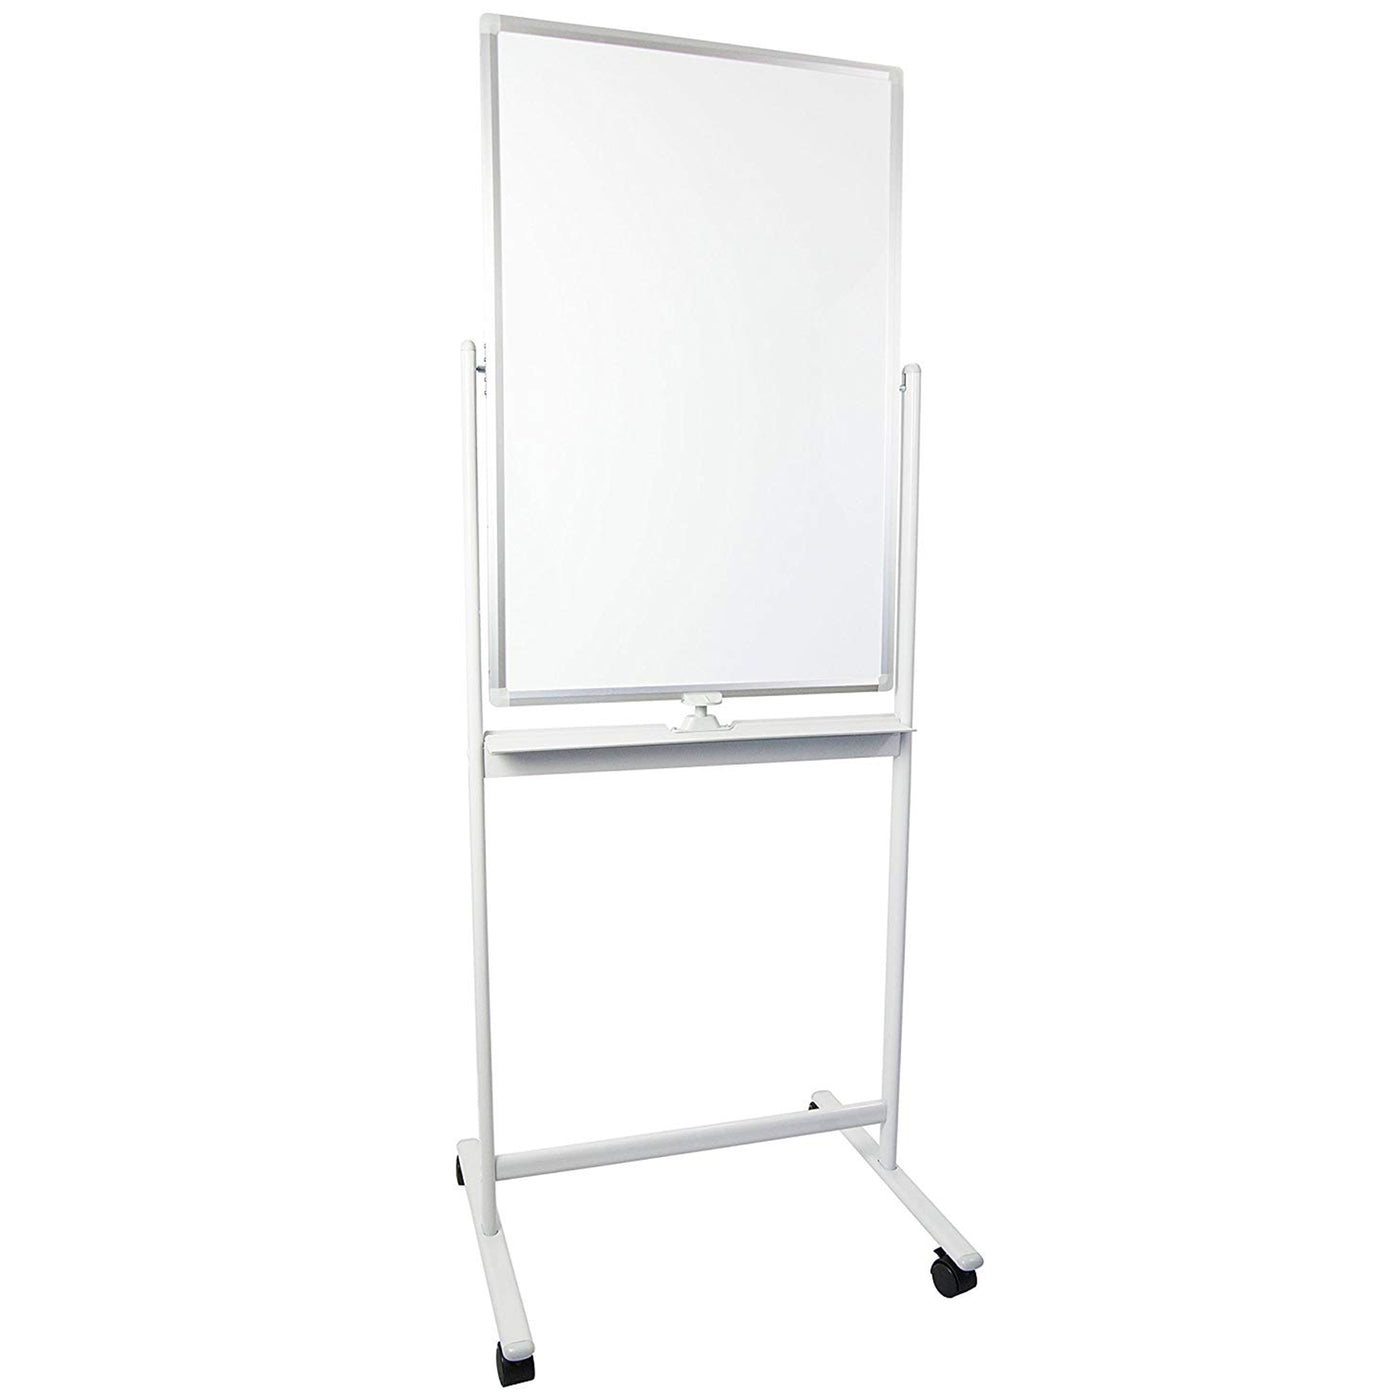 Mobile double sided whiteboard.